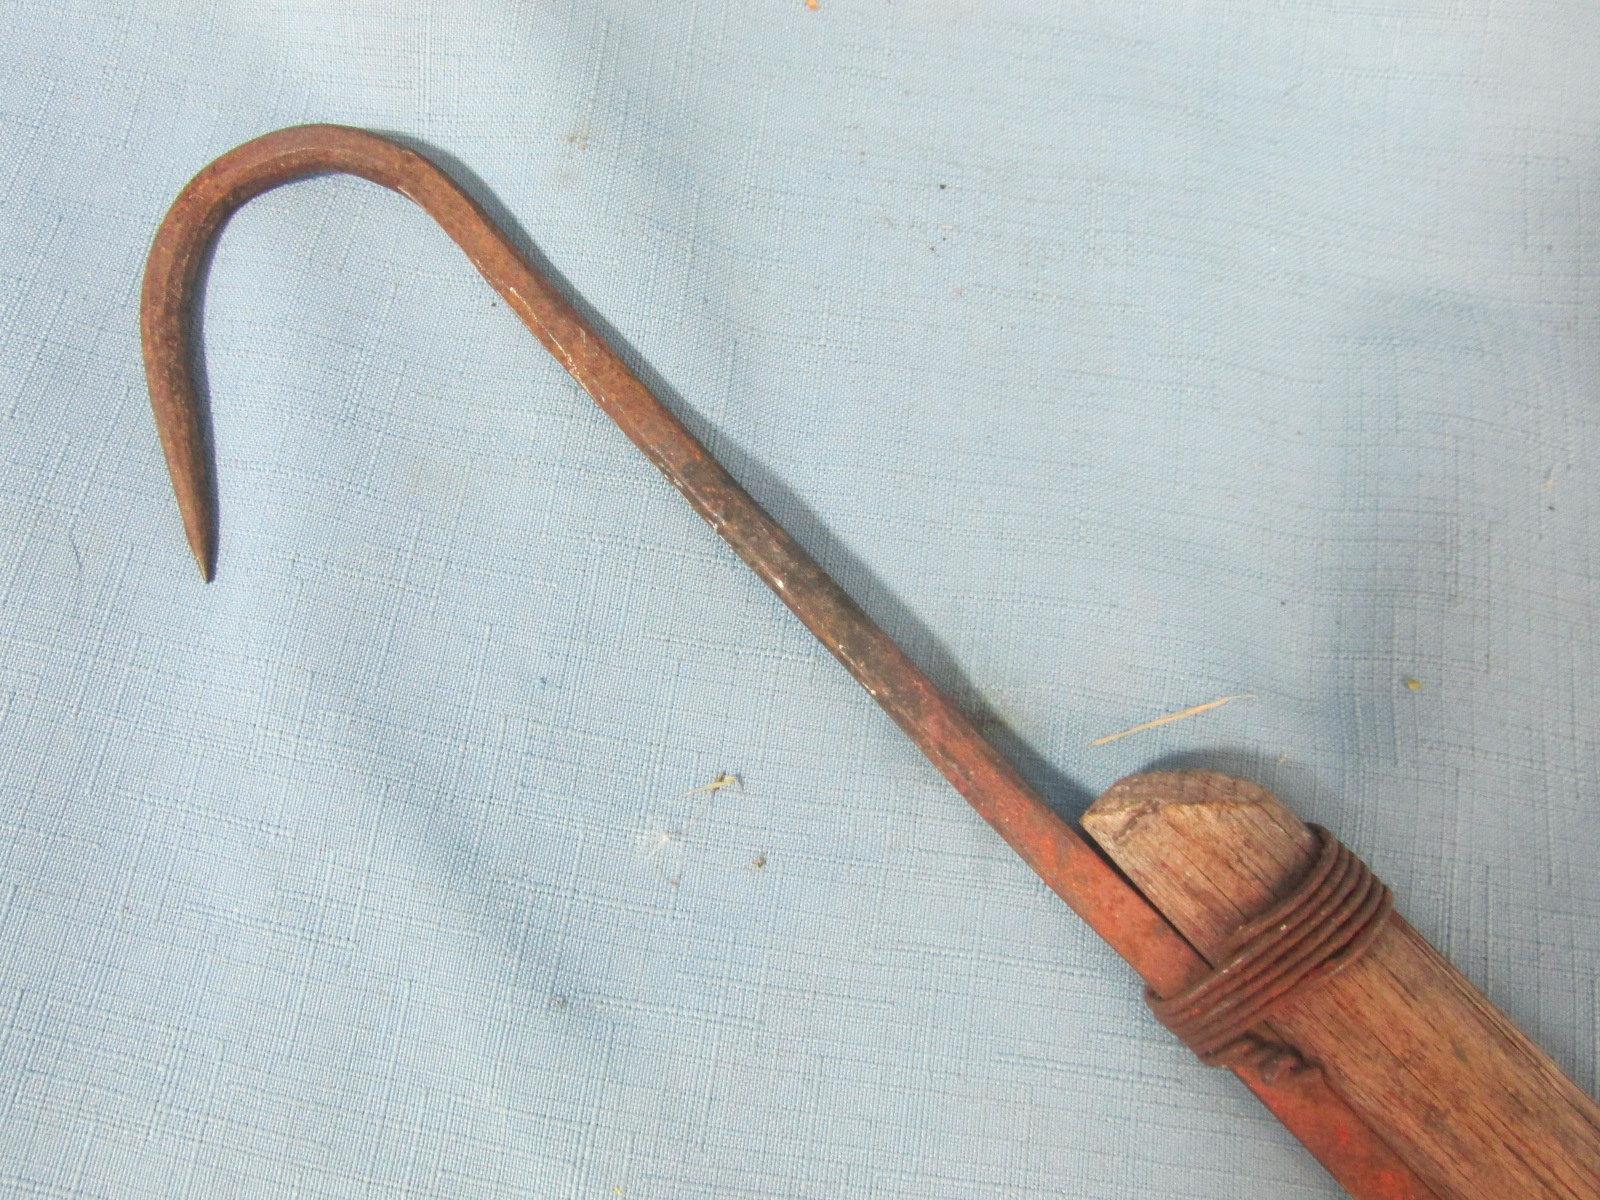 Old Homemade Gaff Hook – Iron Hook attached to Wooden Handle – 21 1/2”L – As shown